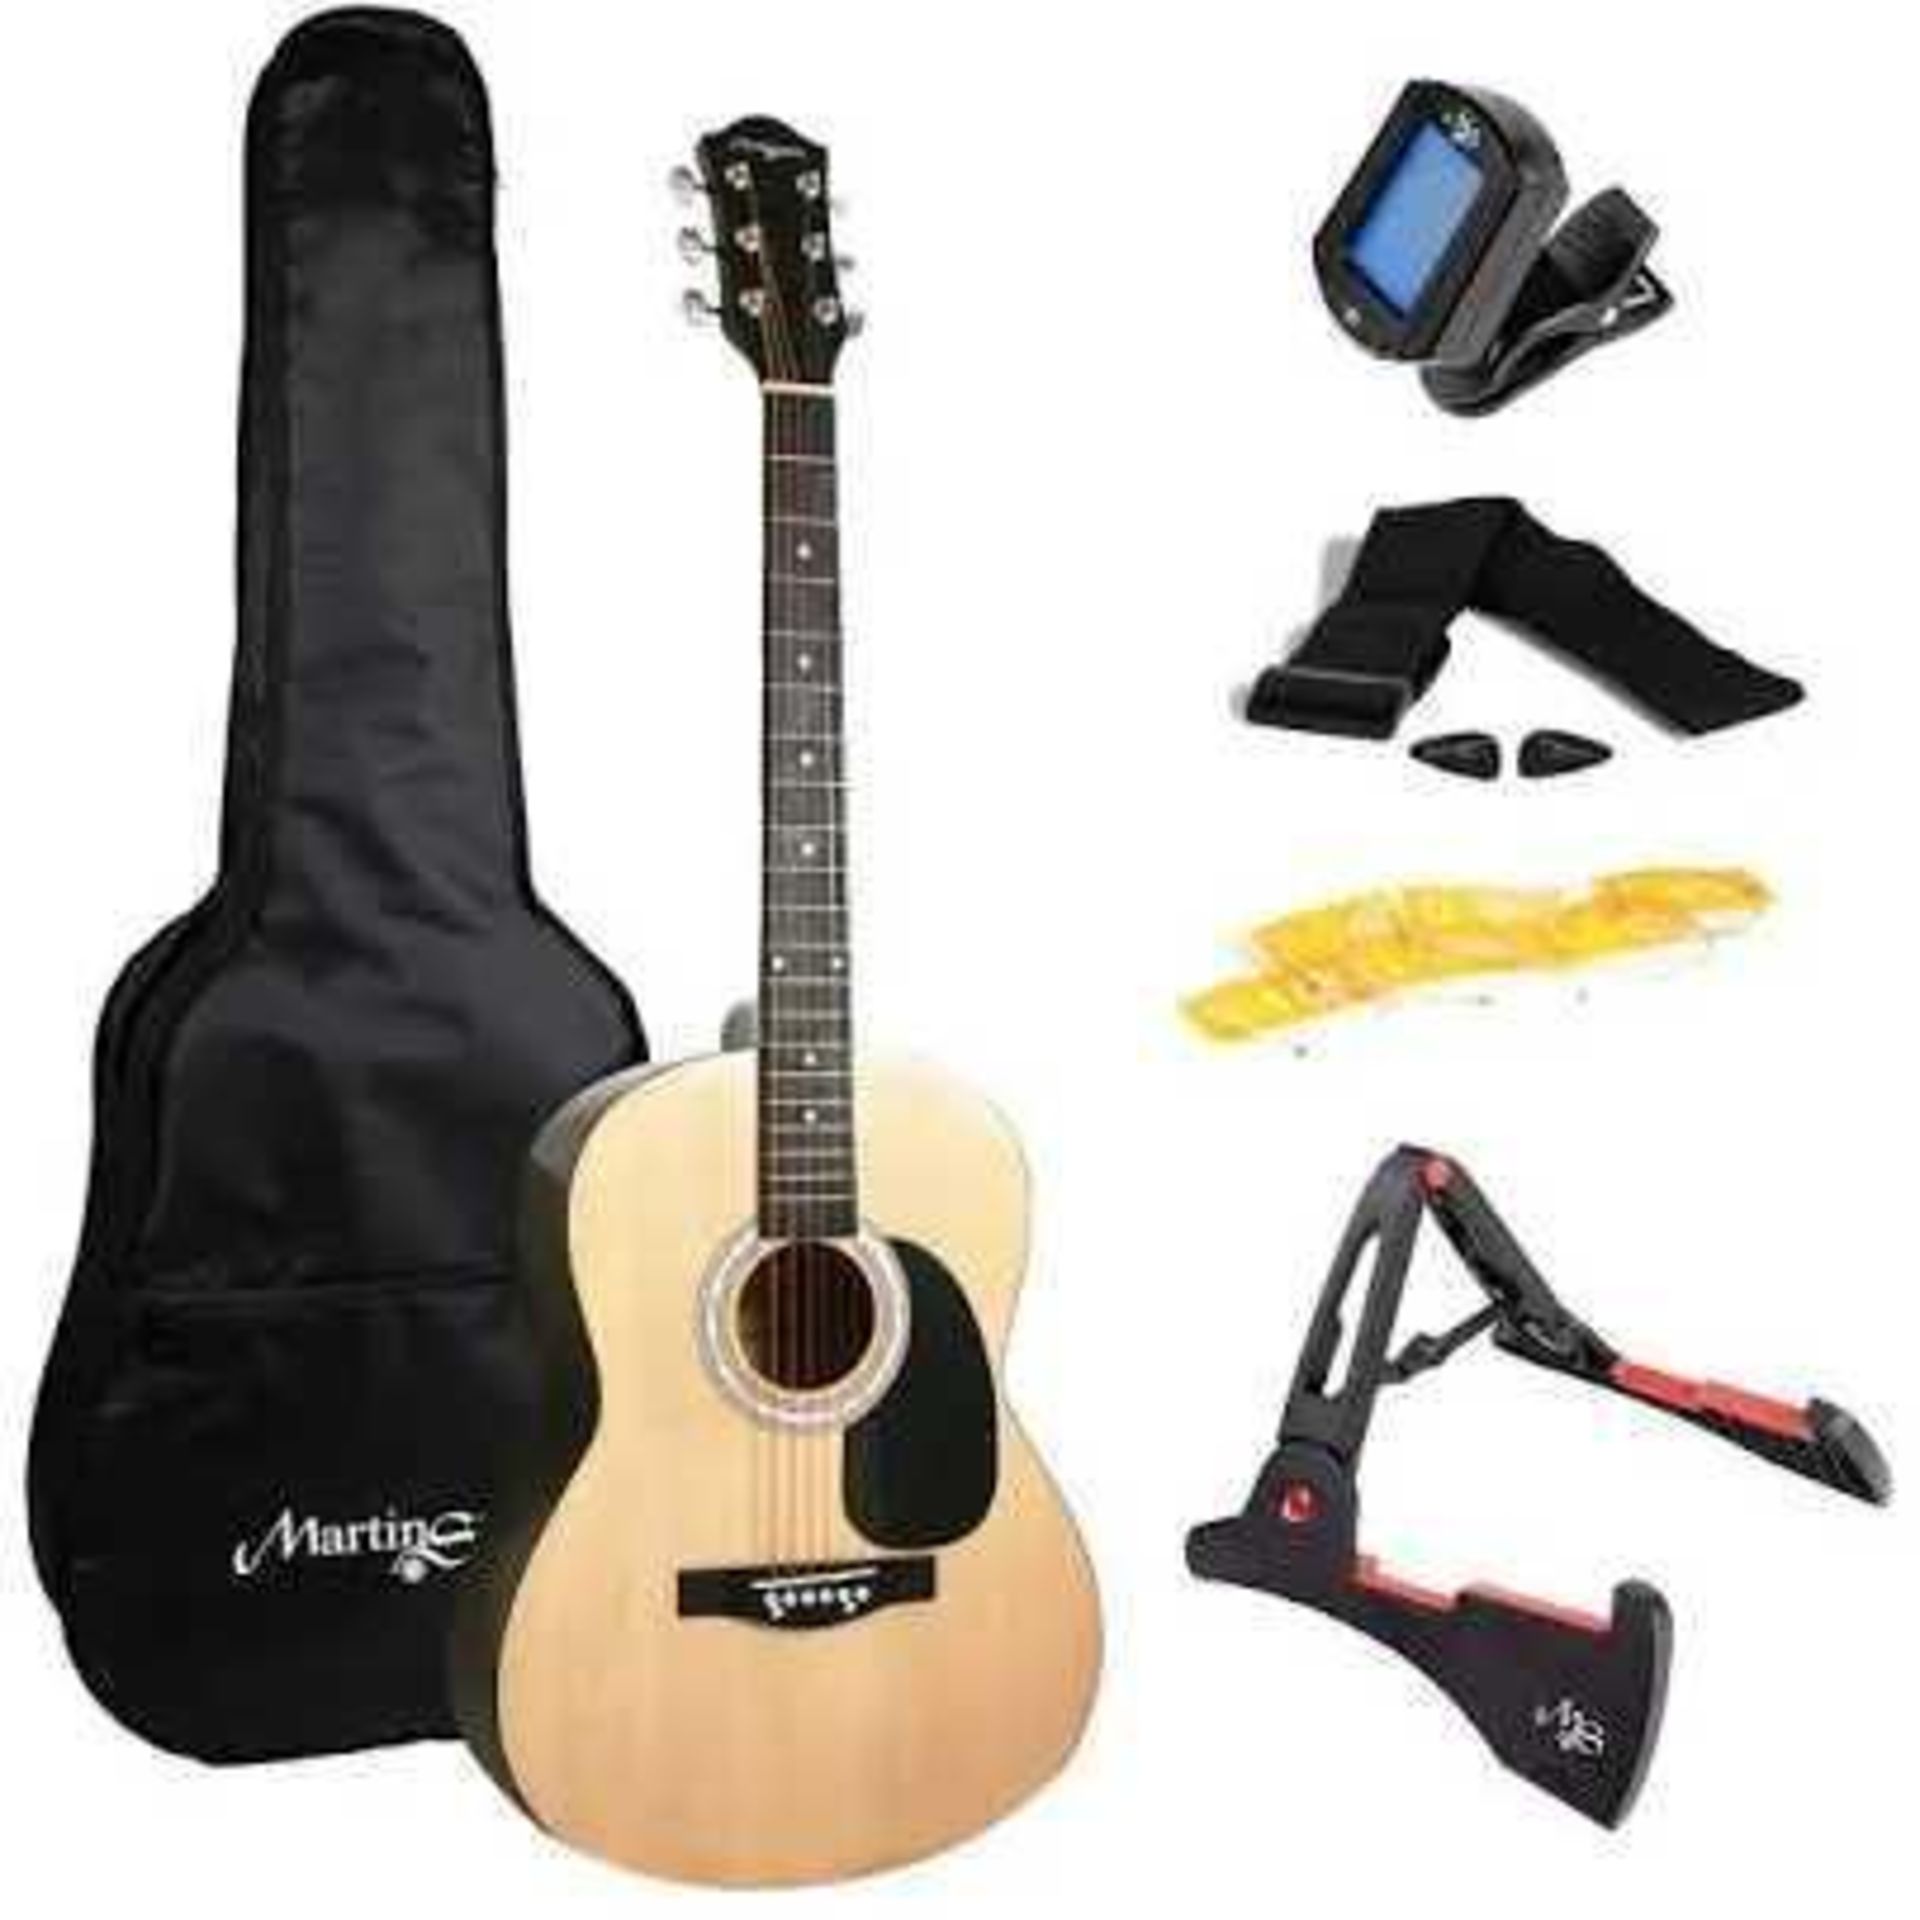 RRP £100 Bagged Martin Smith W101 Full Size Acoustic Guitar